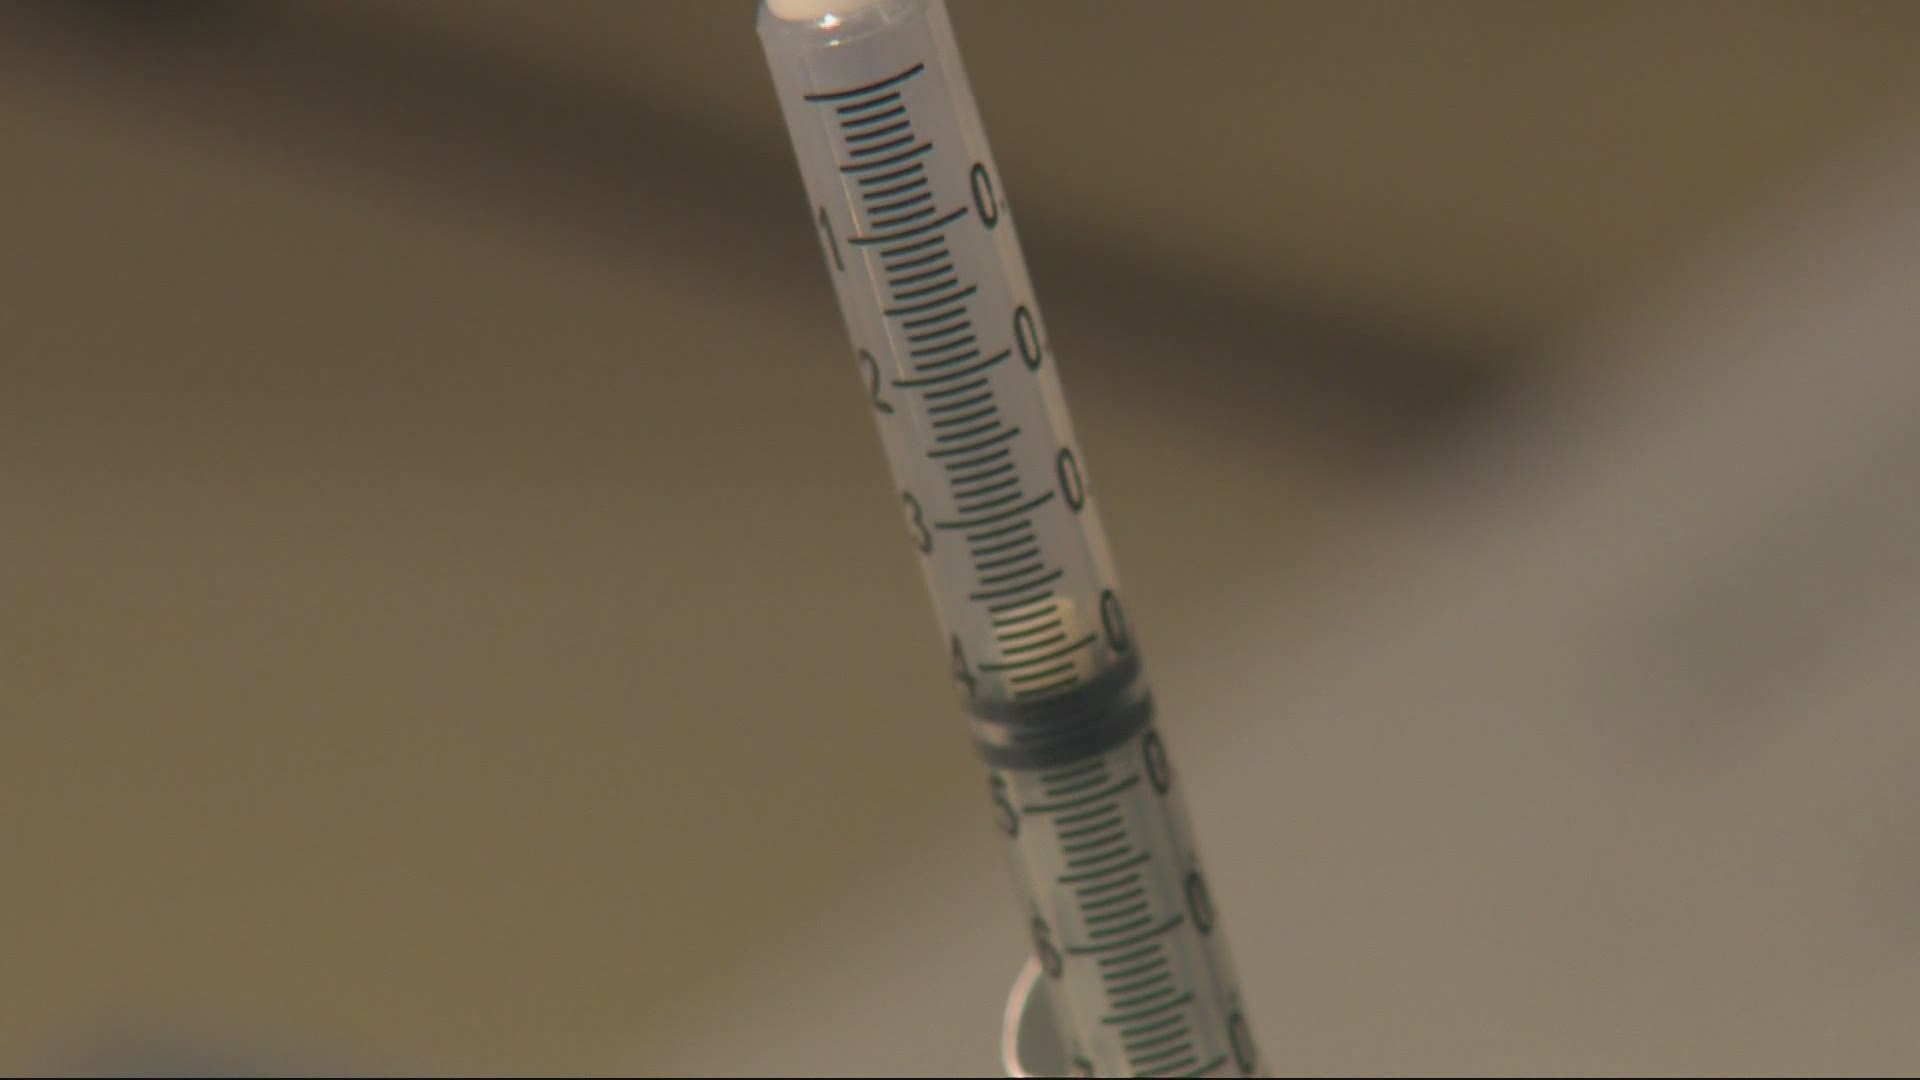 People with health conditions and frontline workers have mixed reactions to the news about updated vaccine priority. Galen Ettlin reports.